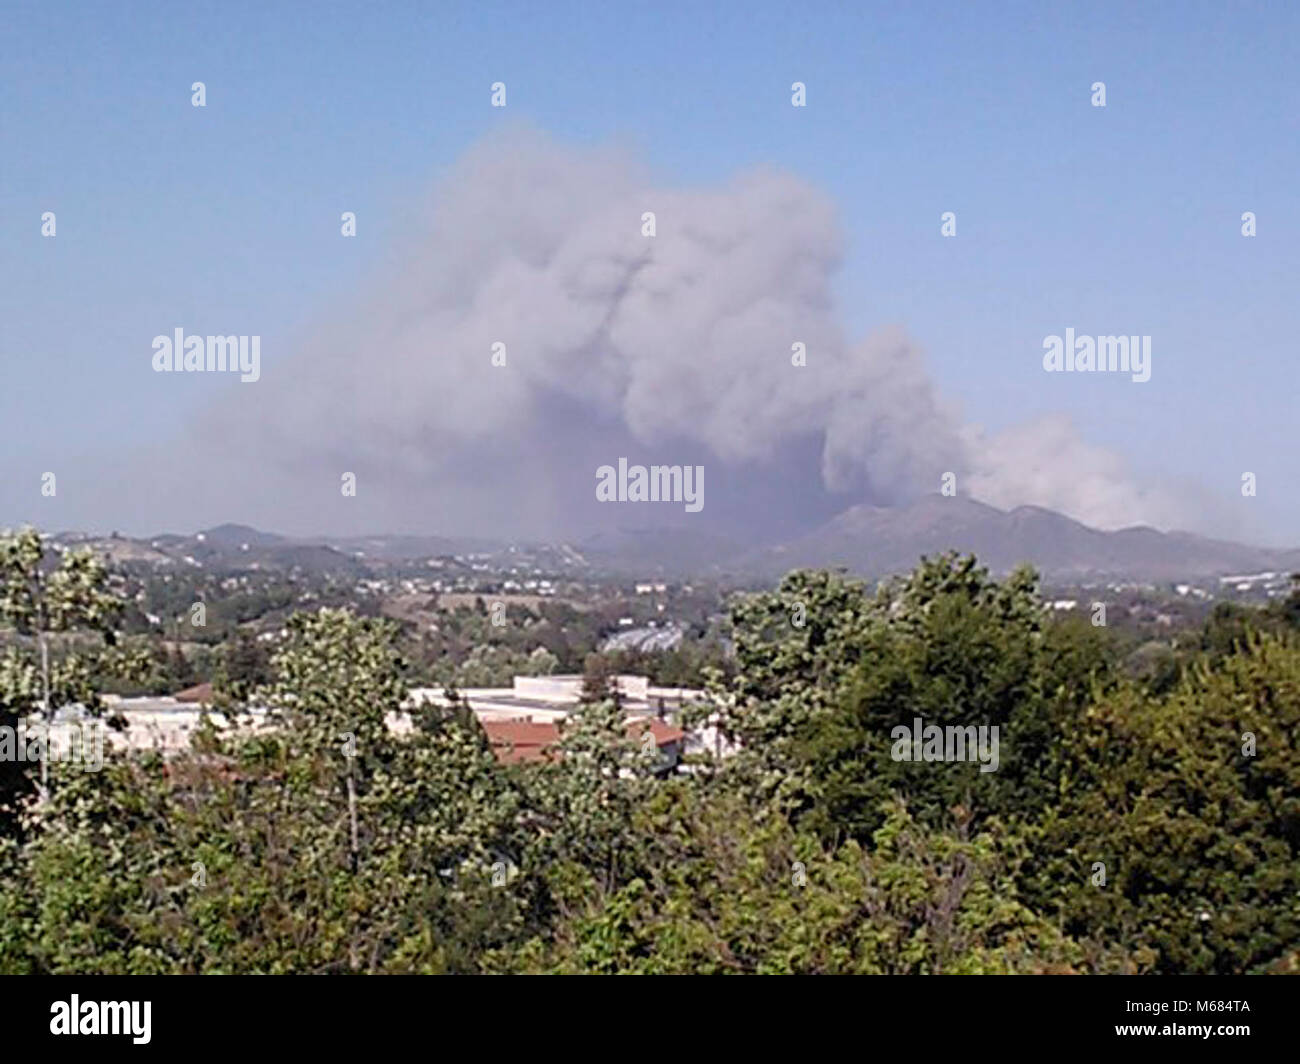 SpringsFire - Hillcrest. View from Stock Photo